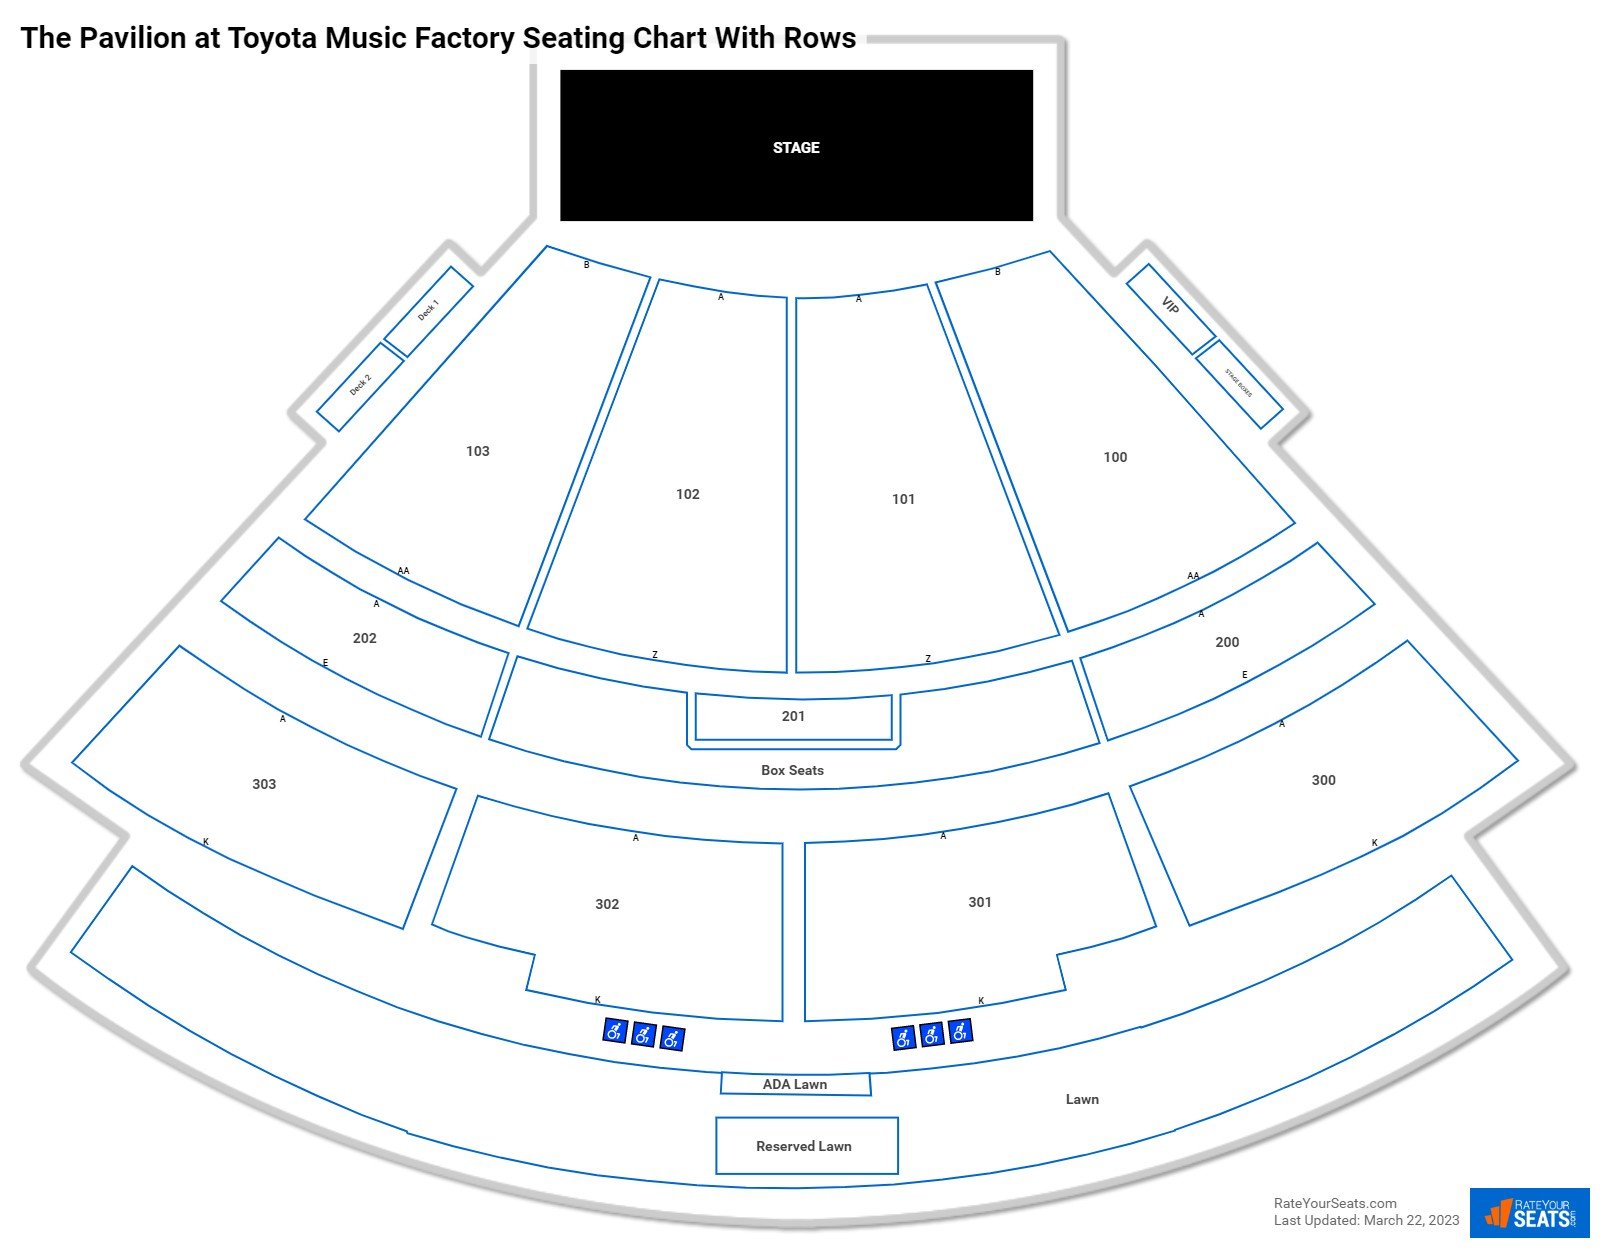 The Pavilion at Toyota Music Factory seating chart with row numbers